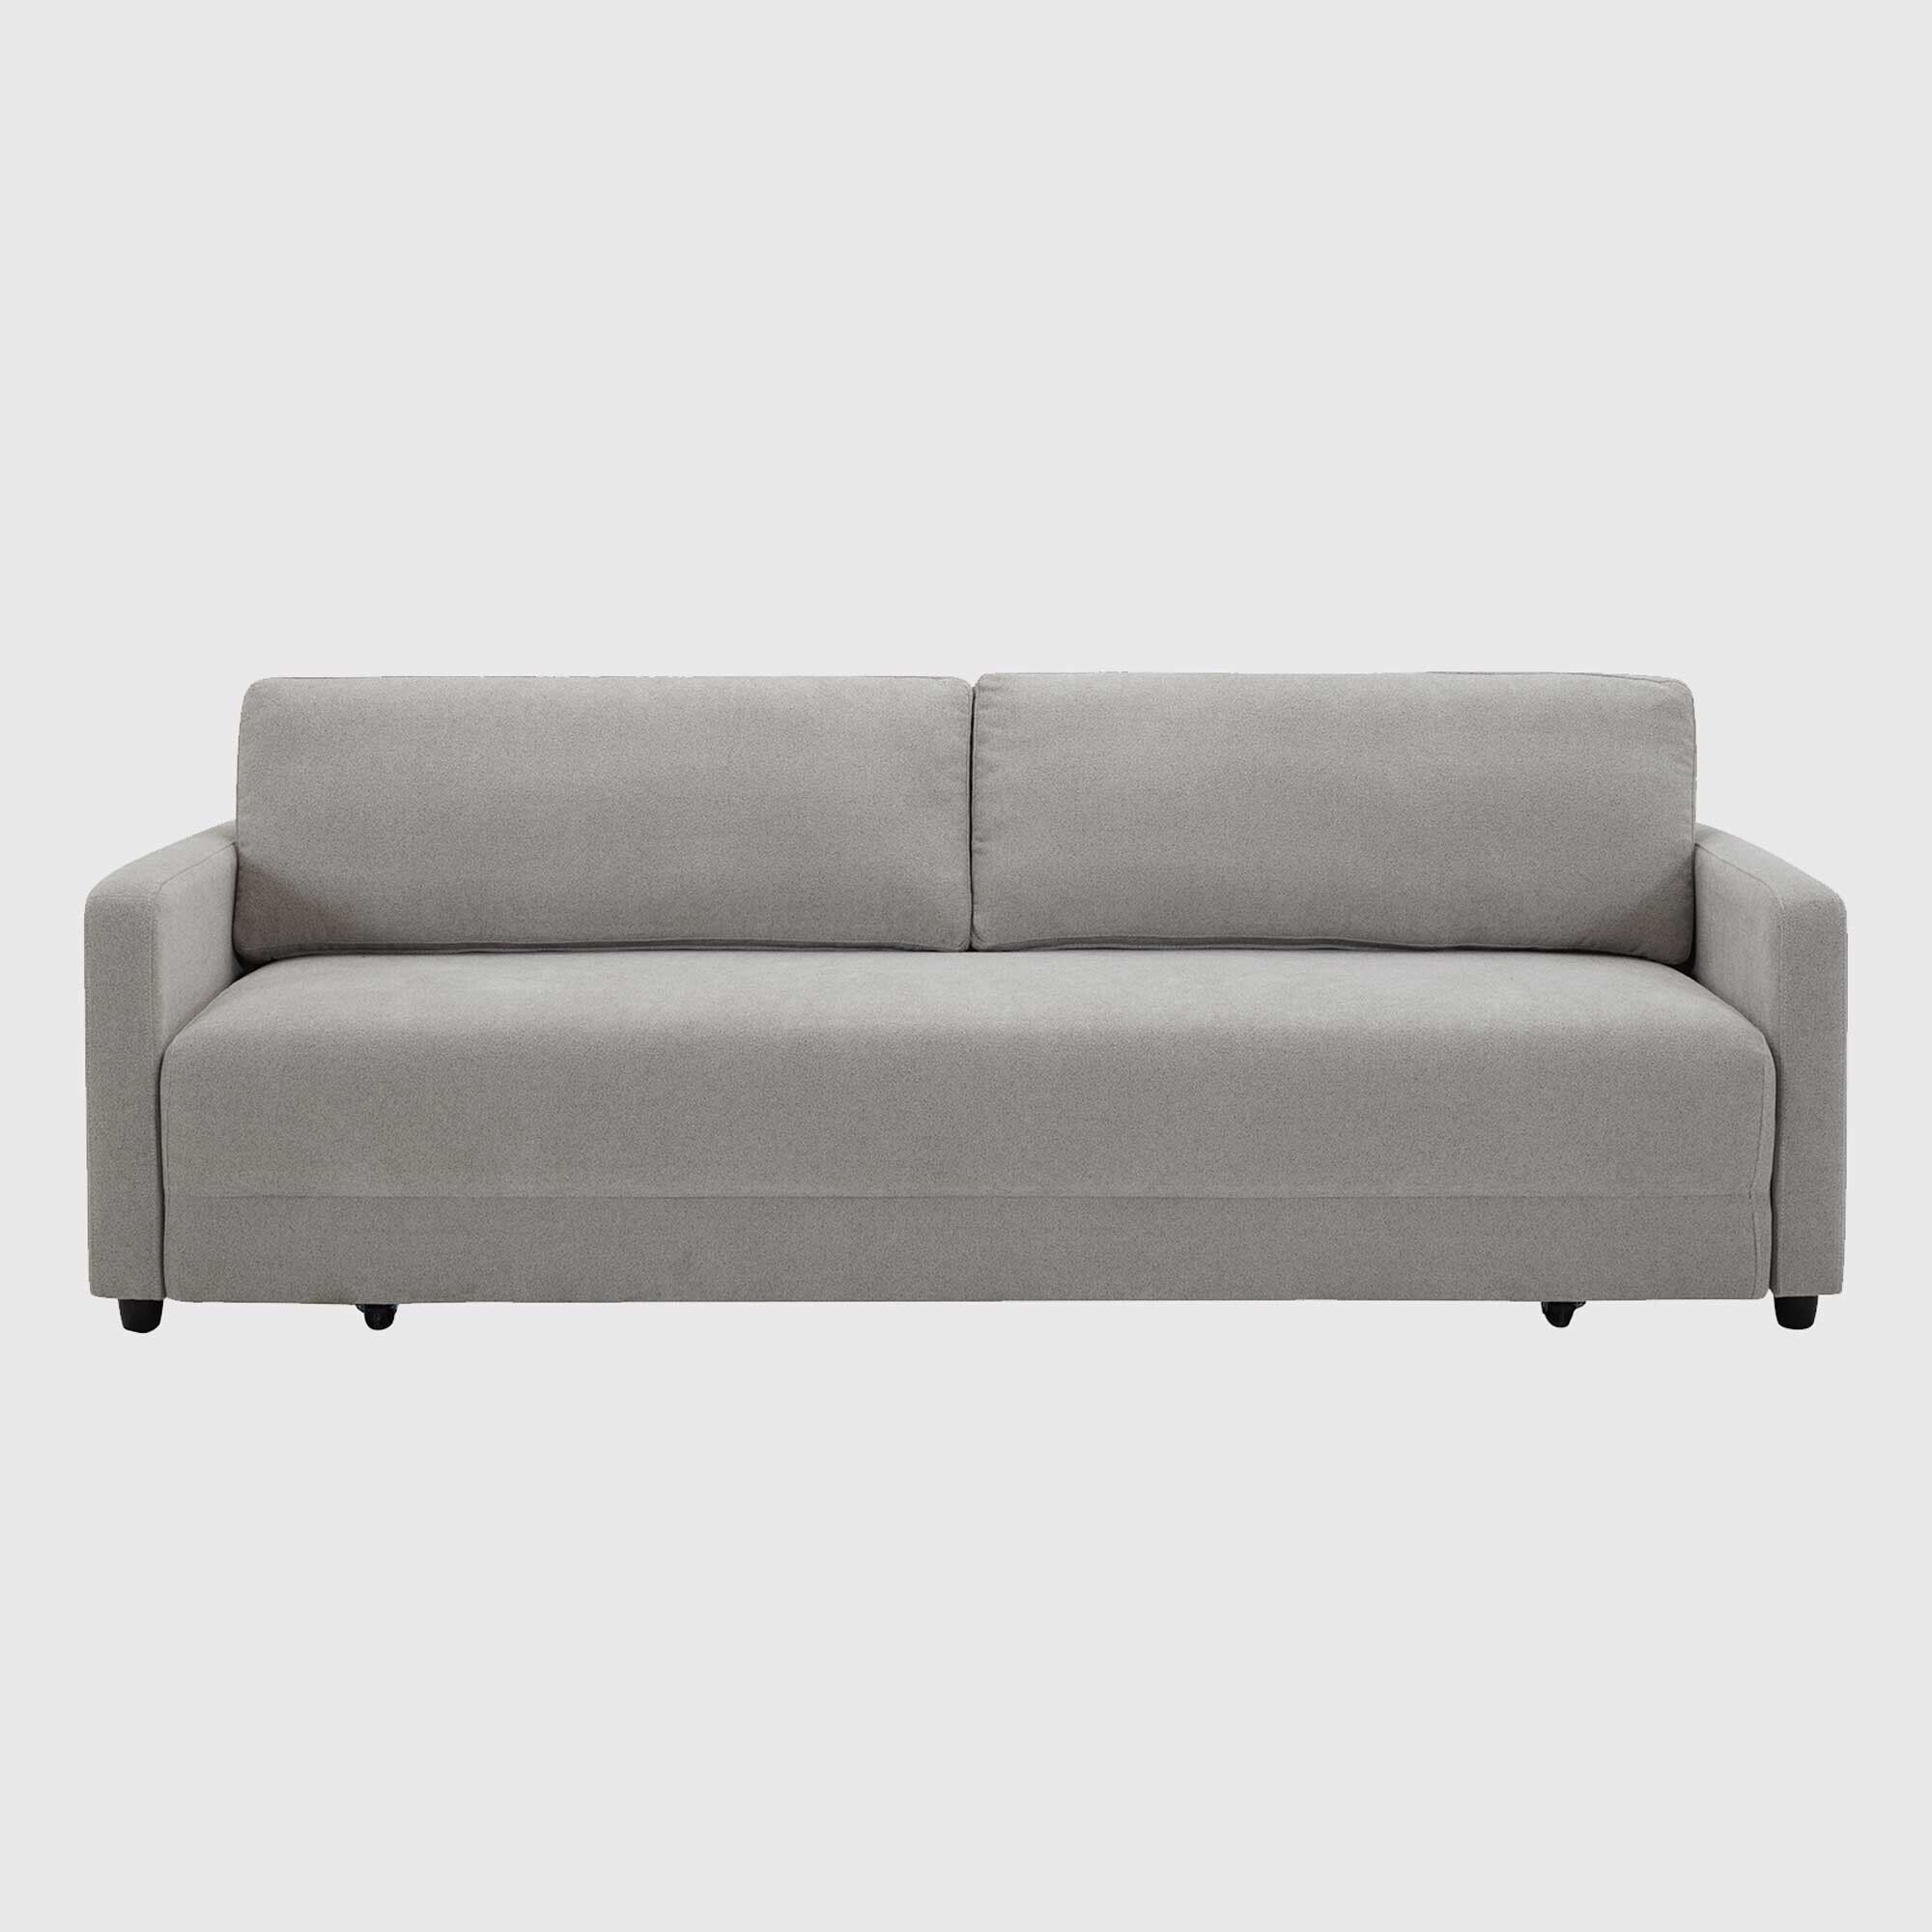 Glade Sofa Bed Bed, Grey | Barker & Stonehouse